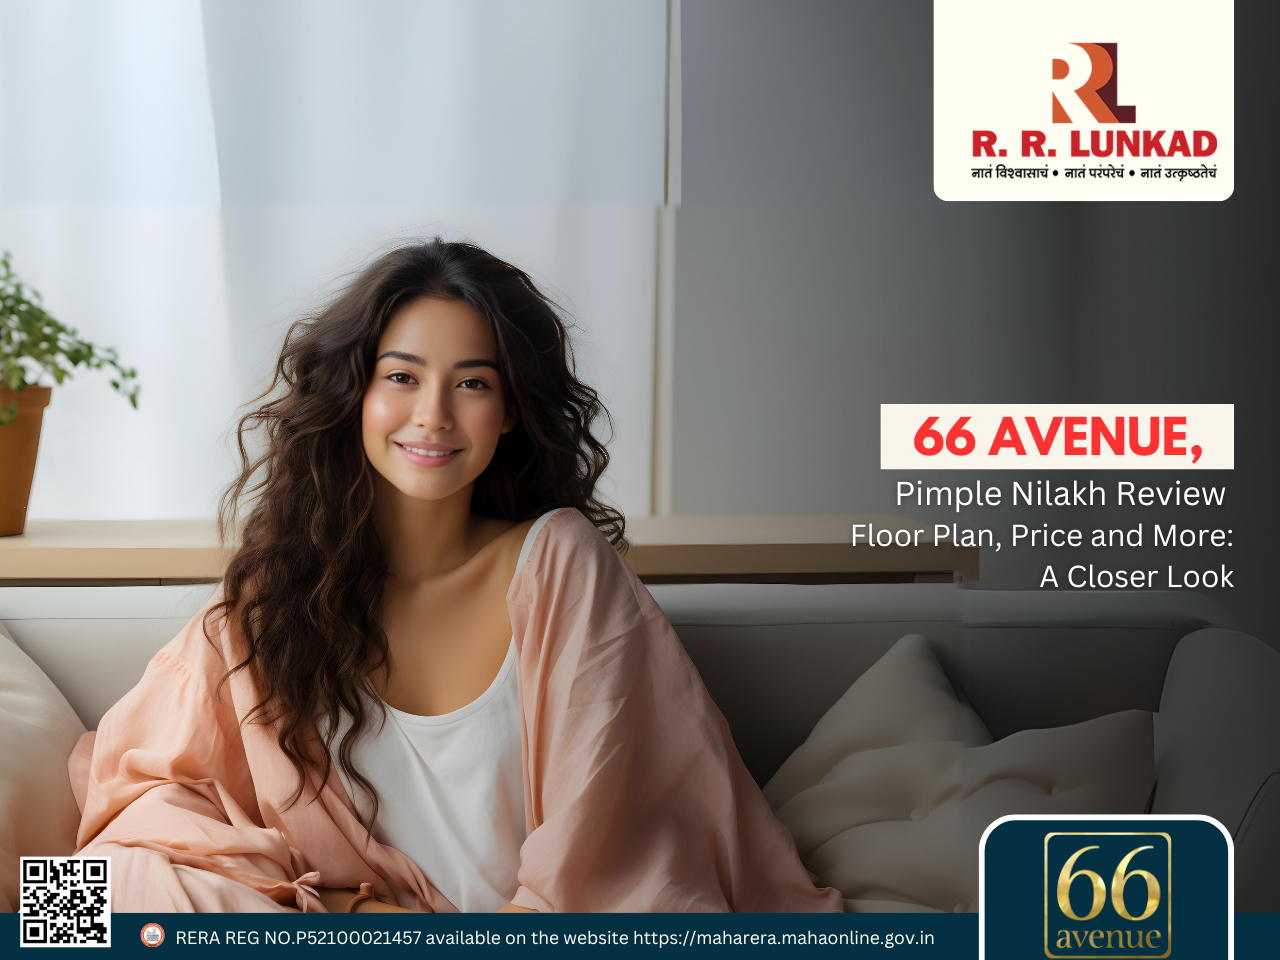 66 Avenue Pimple Nilakh Reviews, Floor Plans and Price